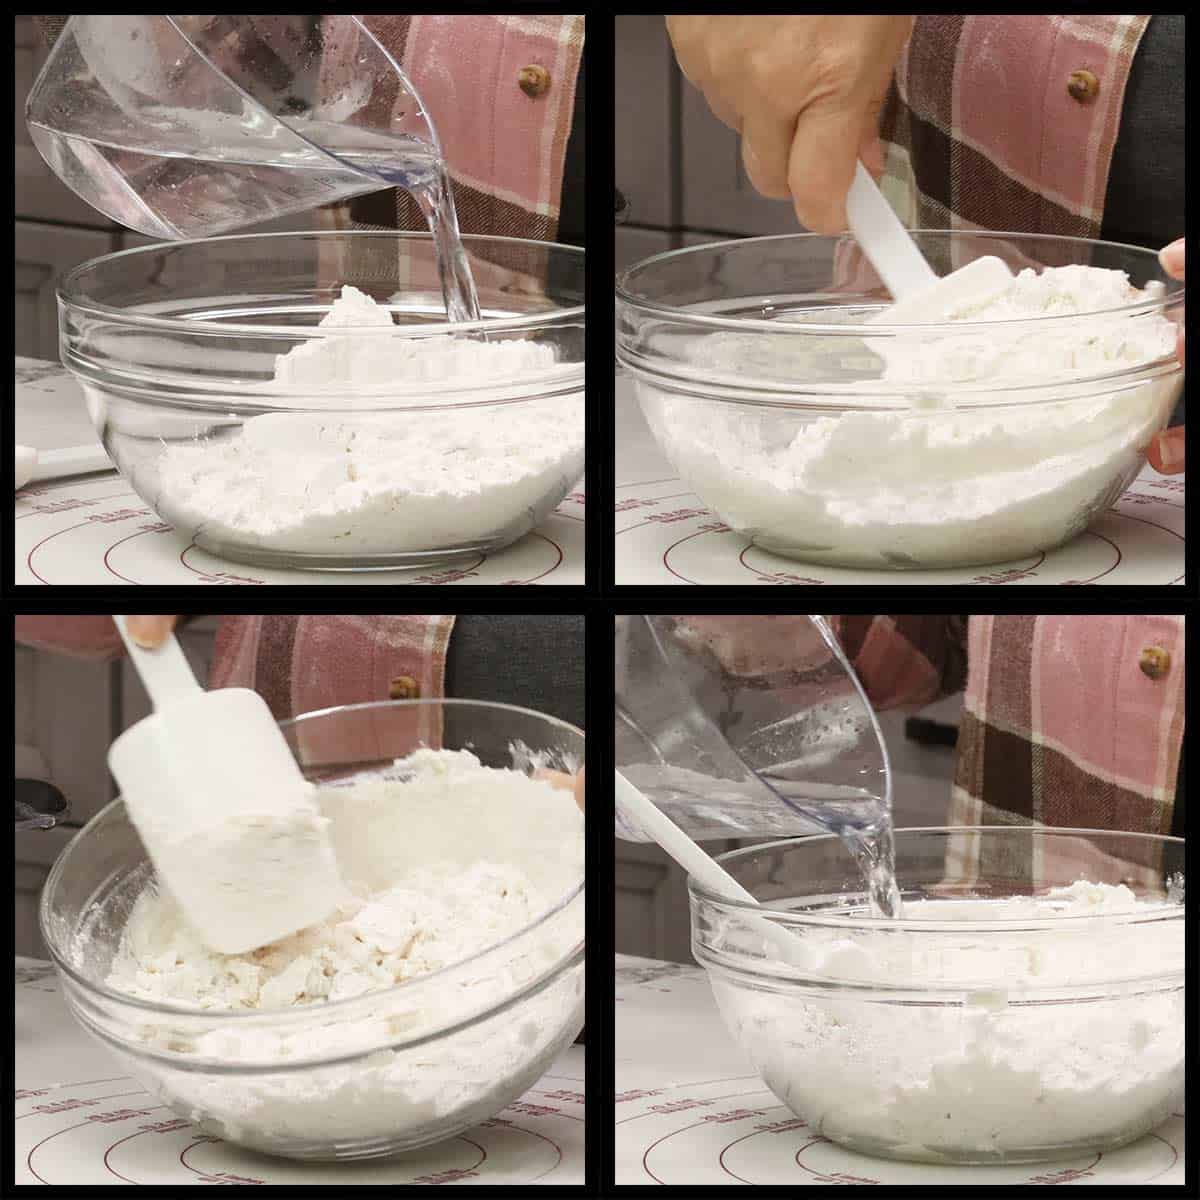 Mixing the water into the flour mixture to make the dough for air fryer pretzel bites.
